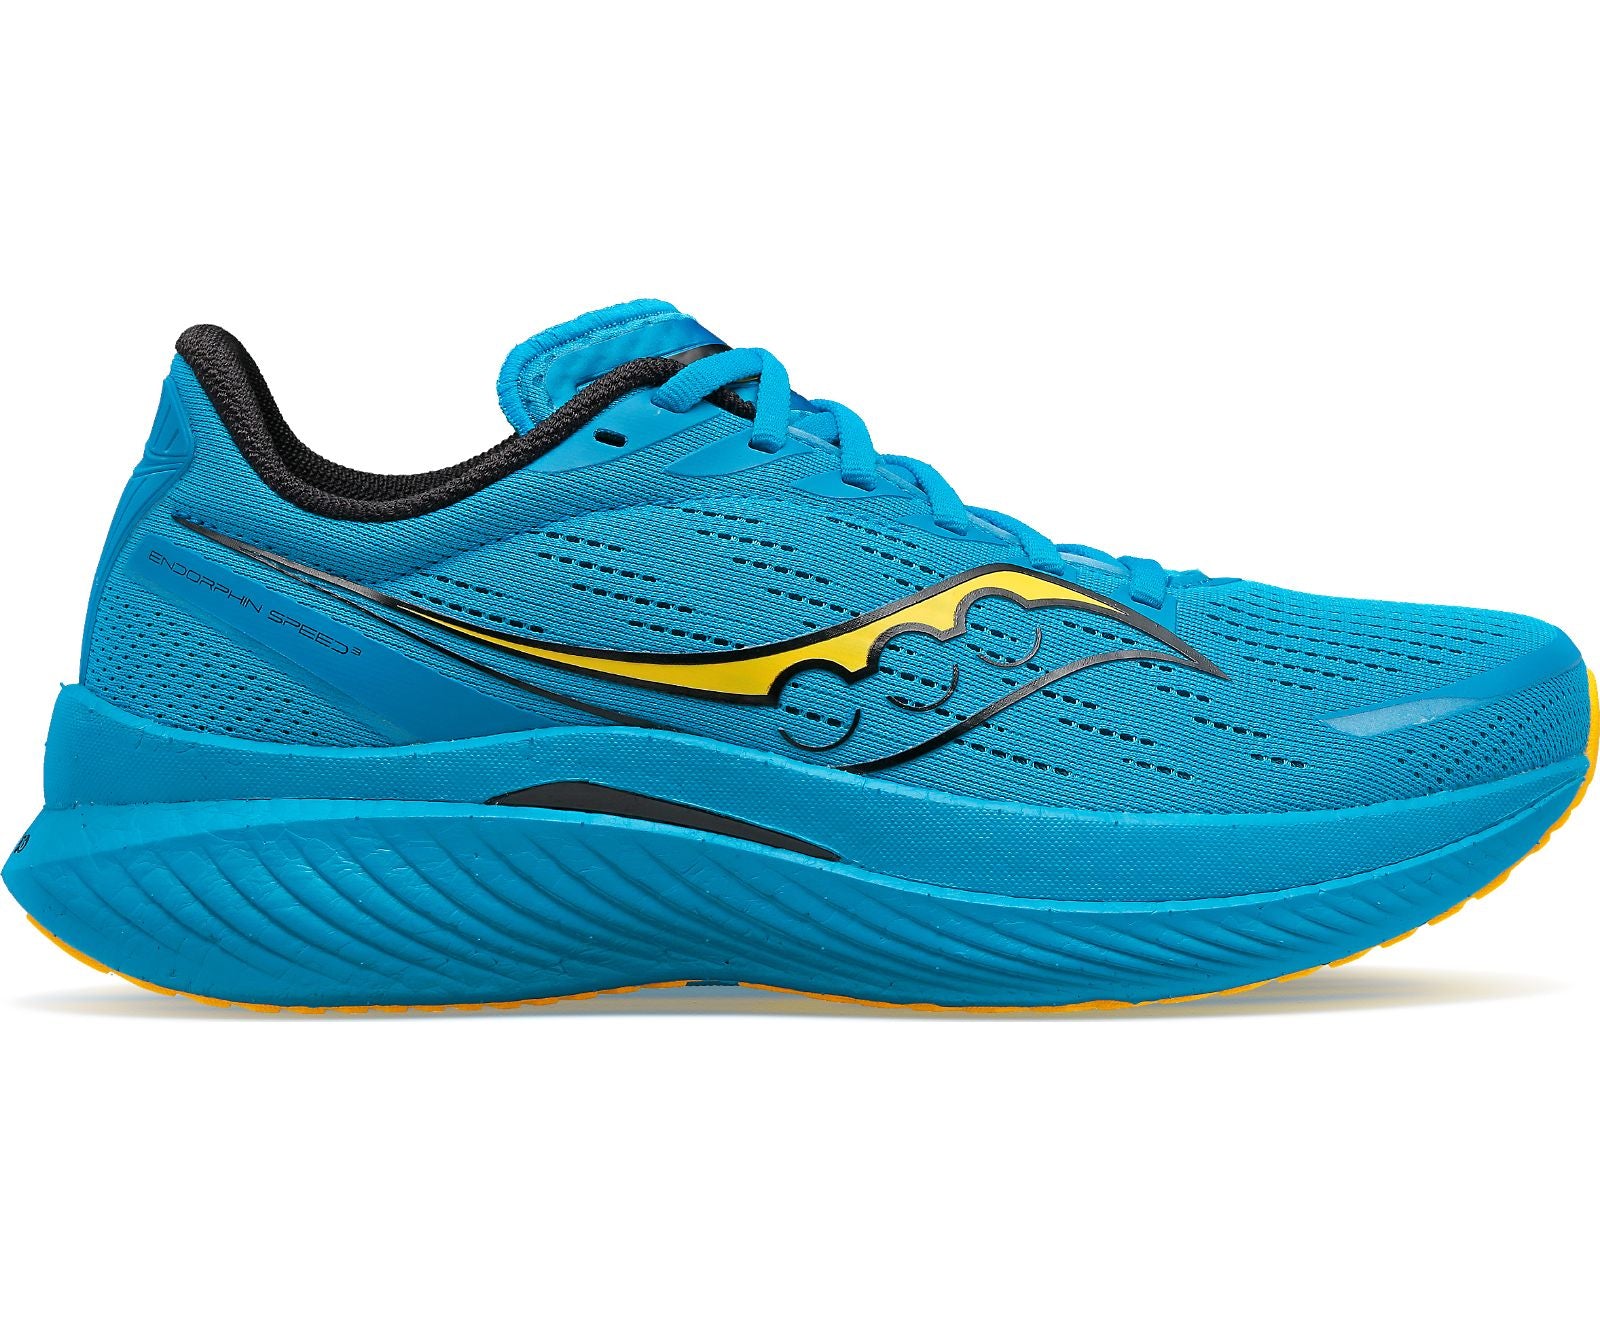 Lateral view of the Men's Saucony Endorphin Speed 3 in the color ocean/vizigold